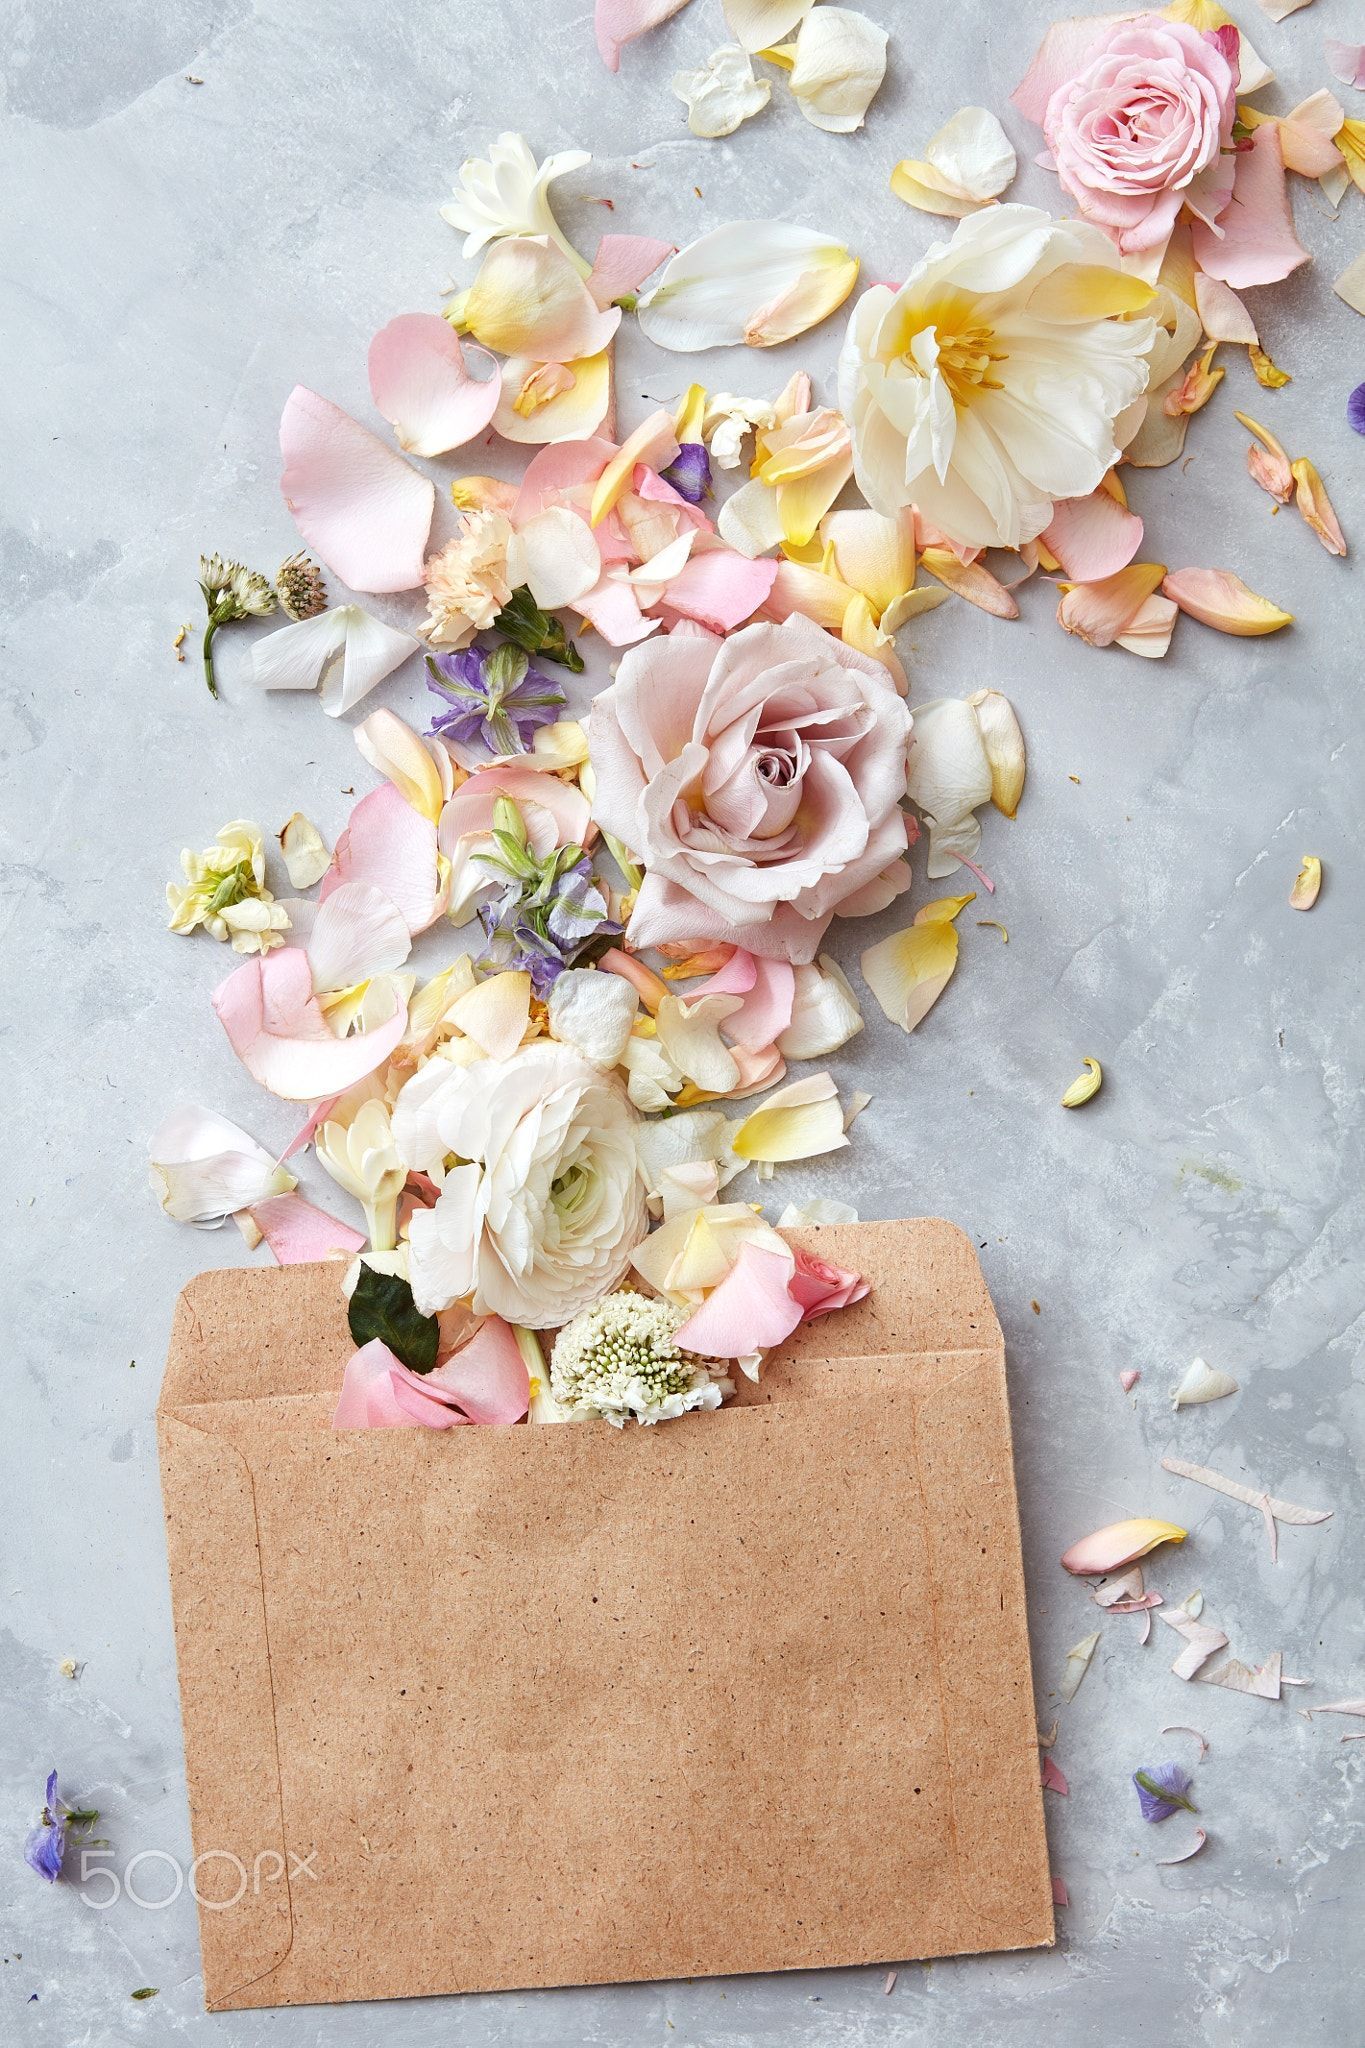 Flowers in envelope envelope fall beautiful flowers on gray concrete background, Flat lay. Floral flatlay, Flower flat lay, Flower aesthetic